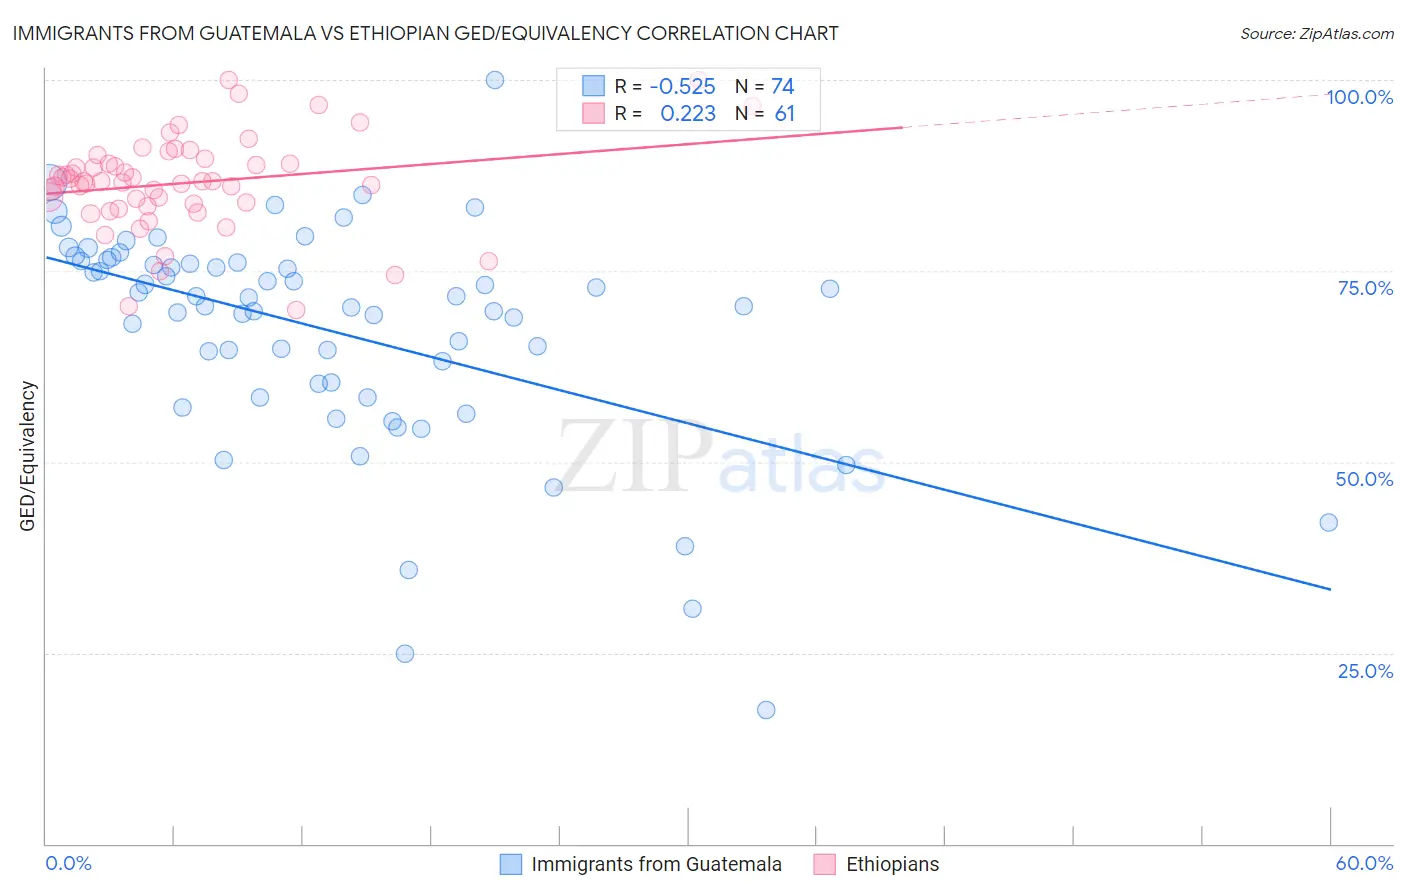 Immigrants from Guatemala vs Ethiopian GED/Equivalency